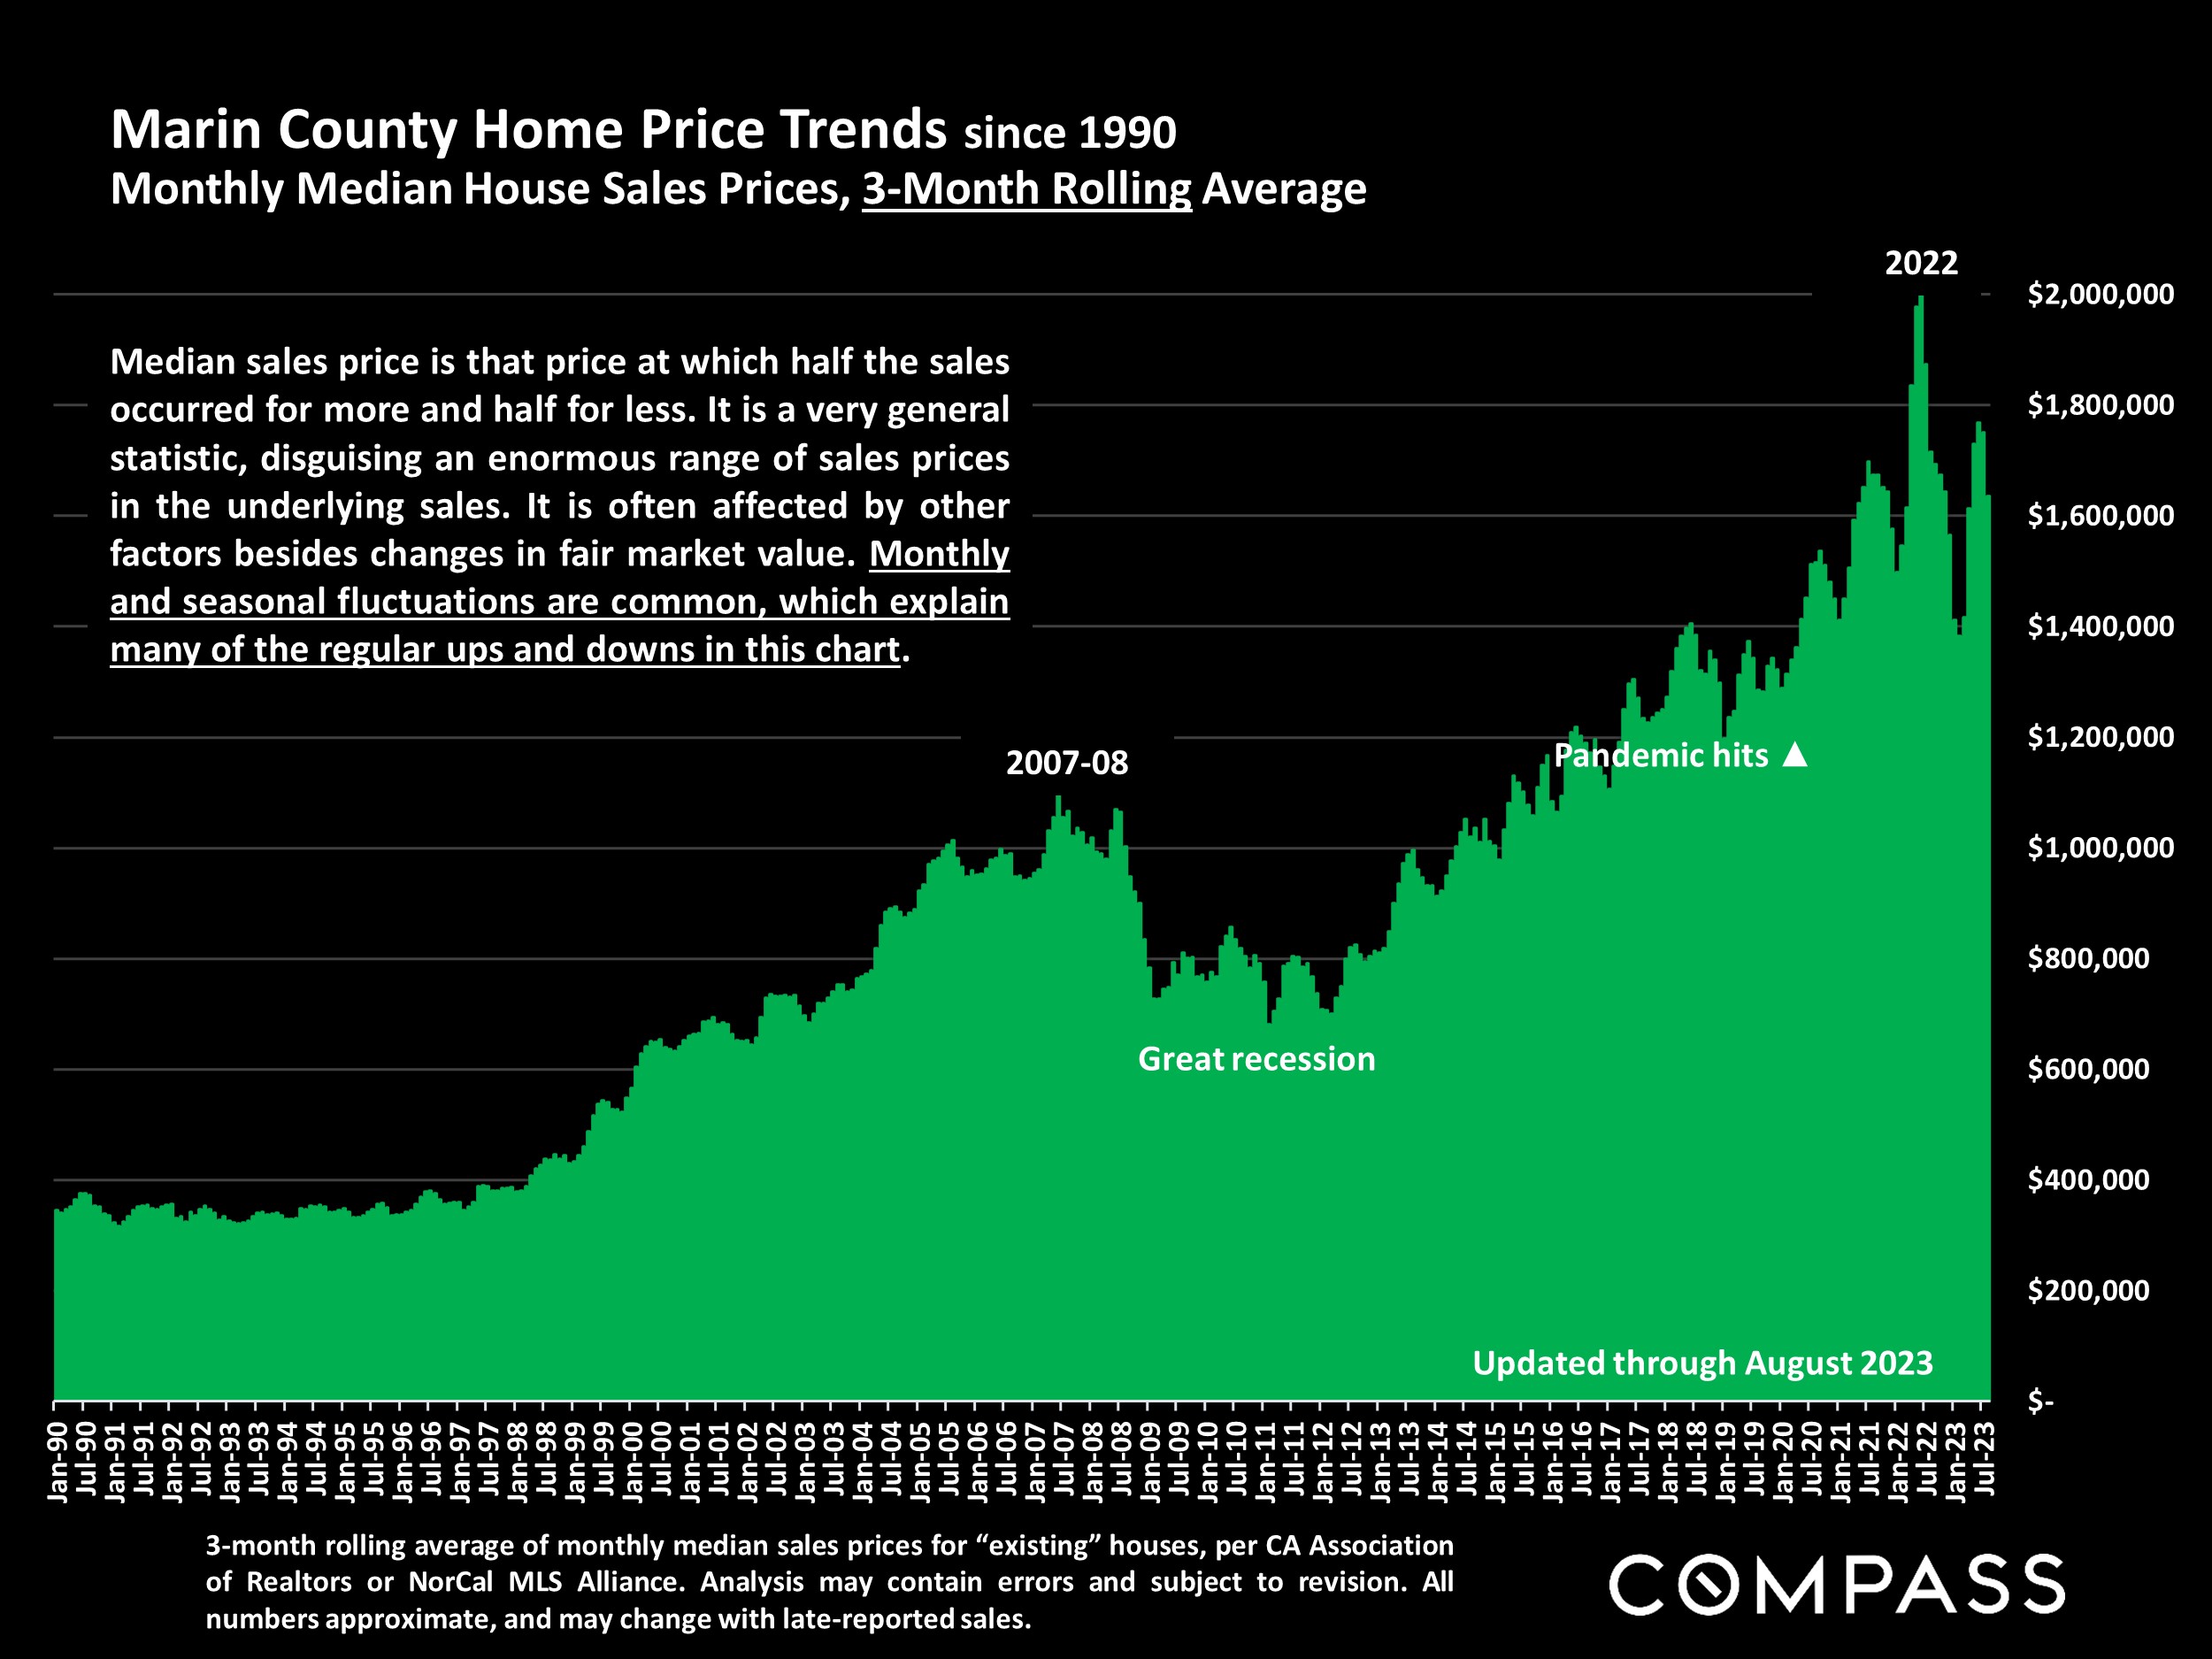 Marin County Home Price Trends since 1990 Monthly Median House Sales Prices, 3-Month Rolling Average